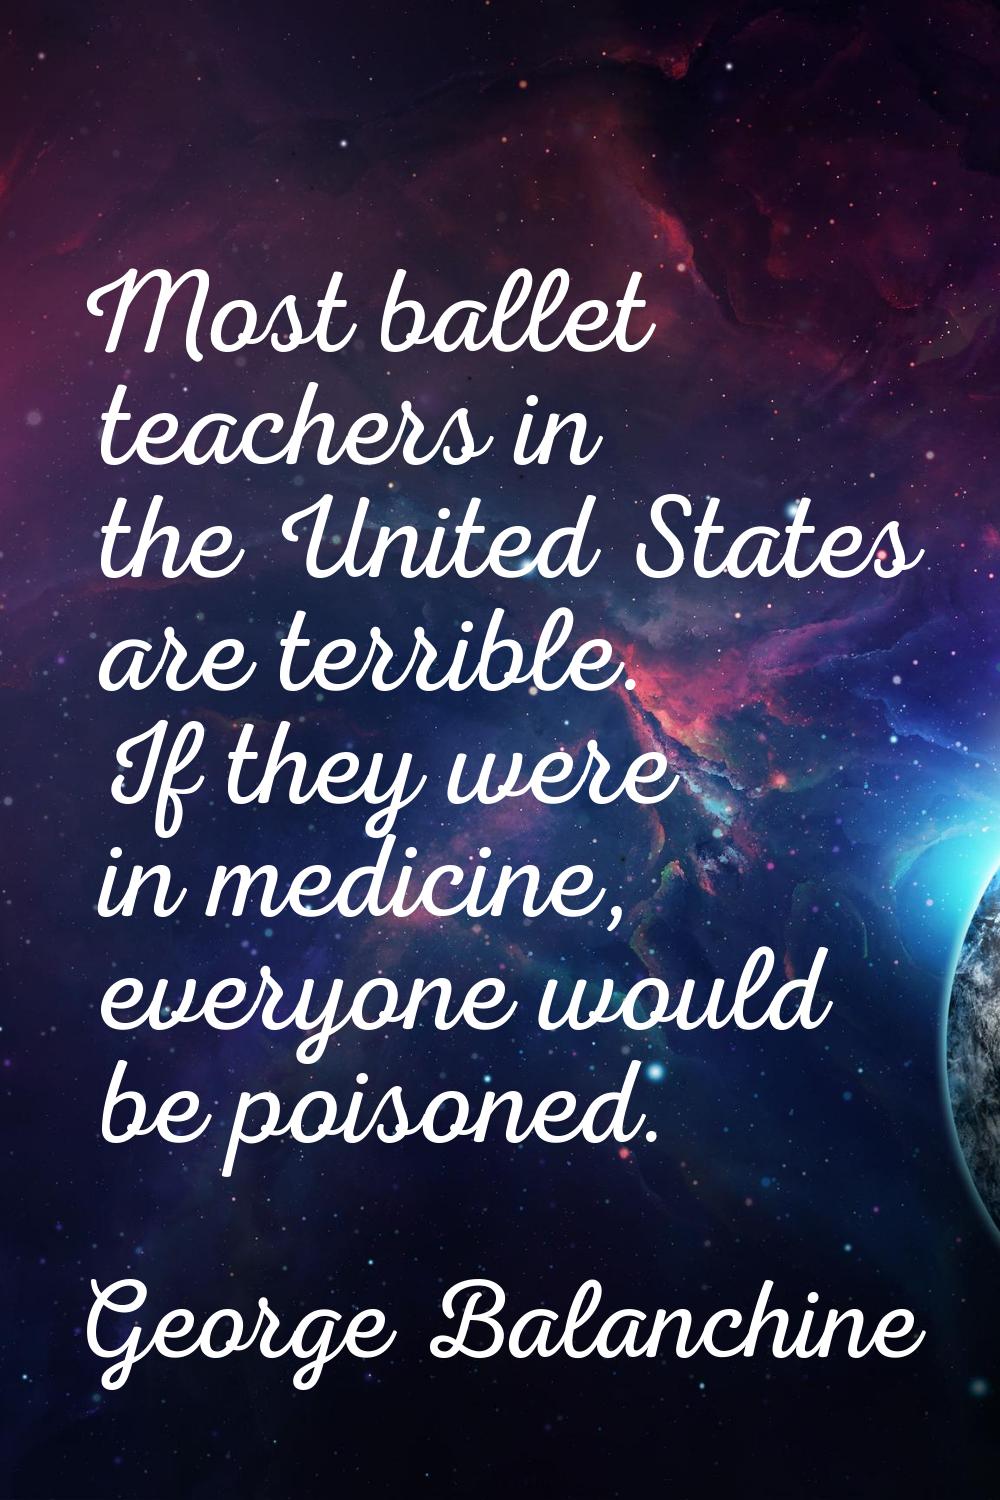 Most ballet teachers in the United States are terrible. If they were in medicine, everyone would be